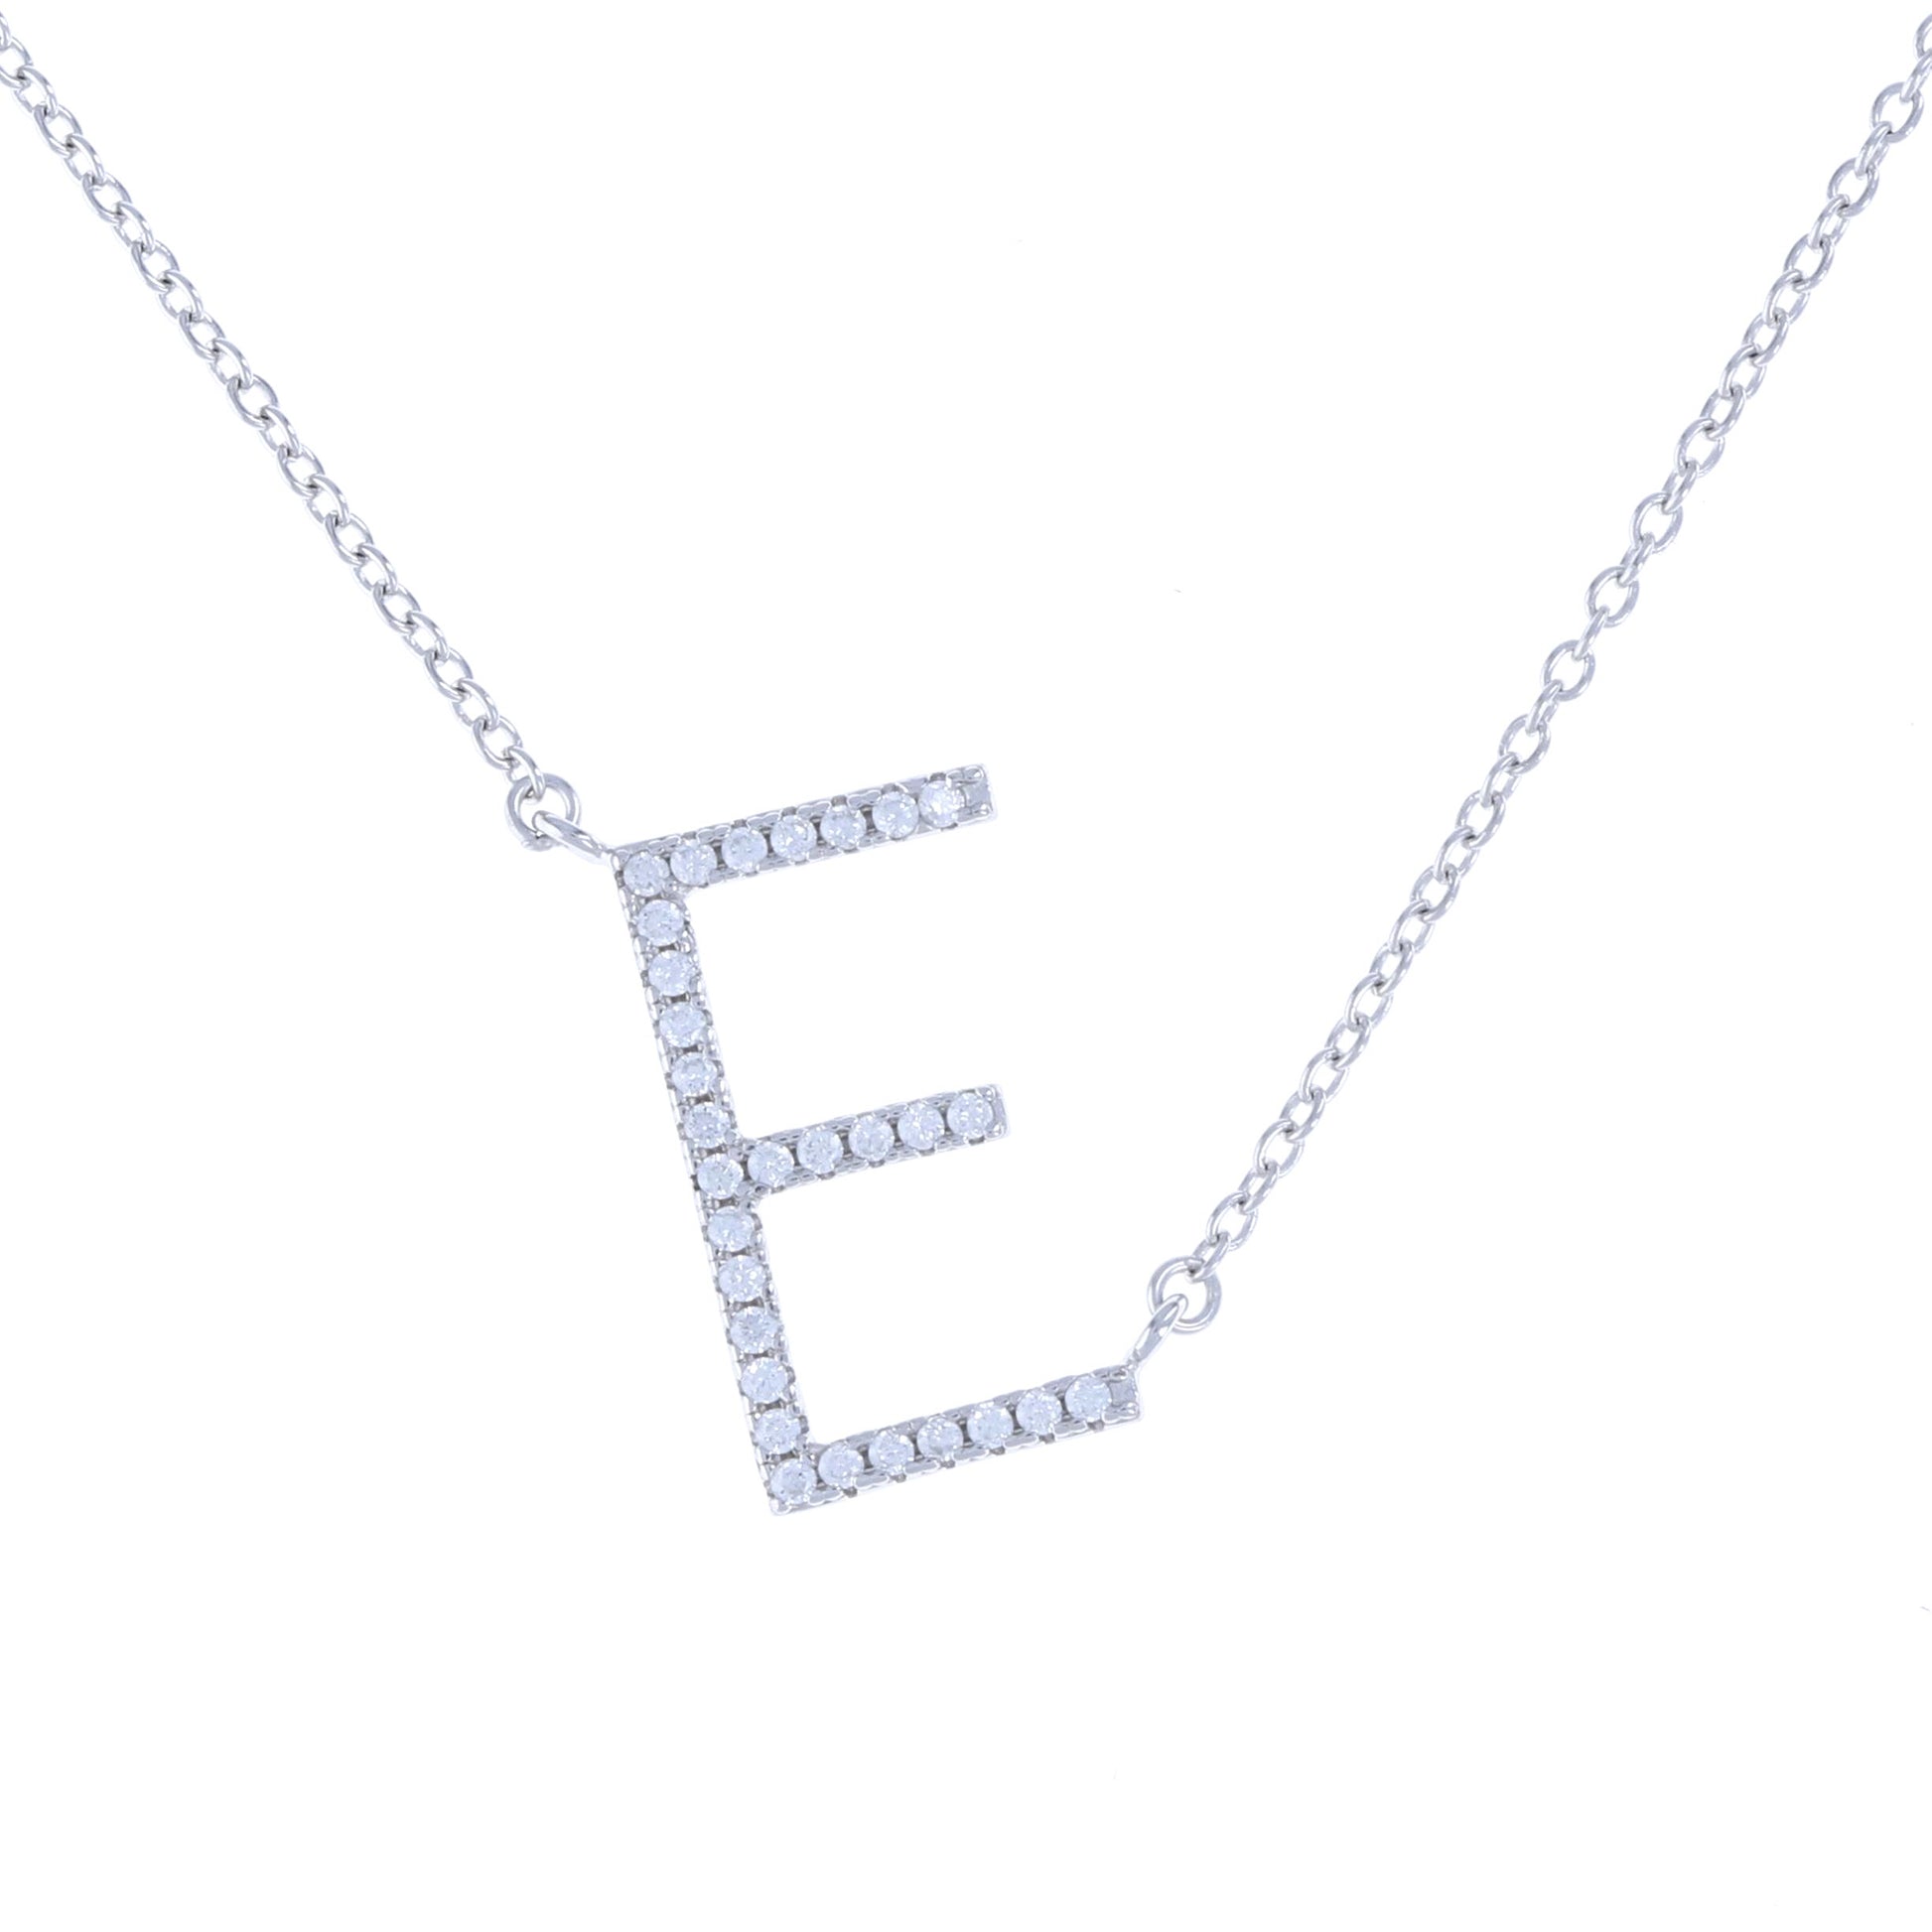 Sideways Letter E initial necklace in sterling silver